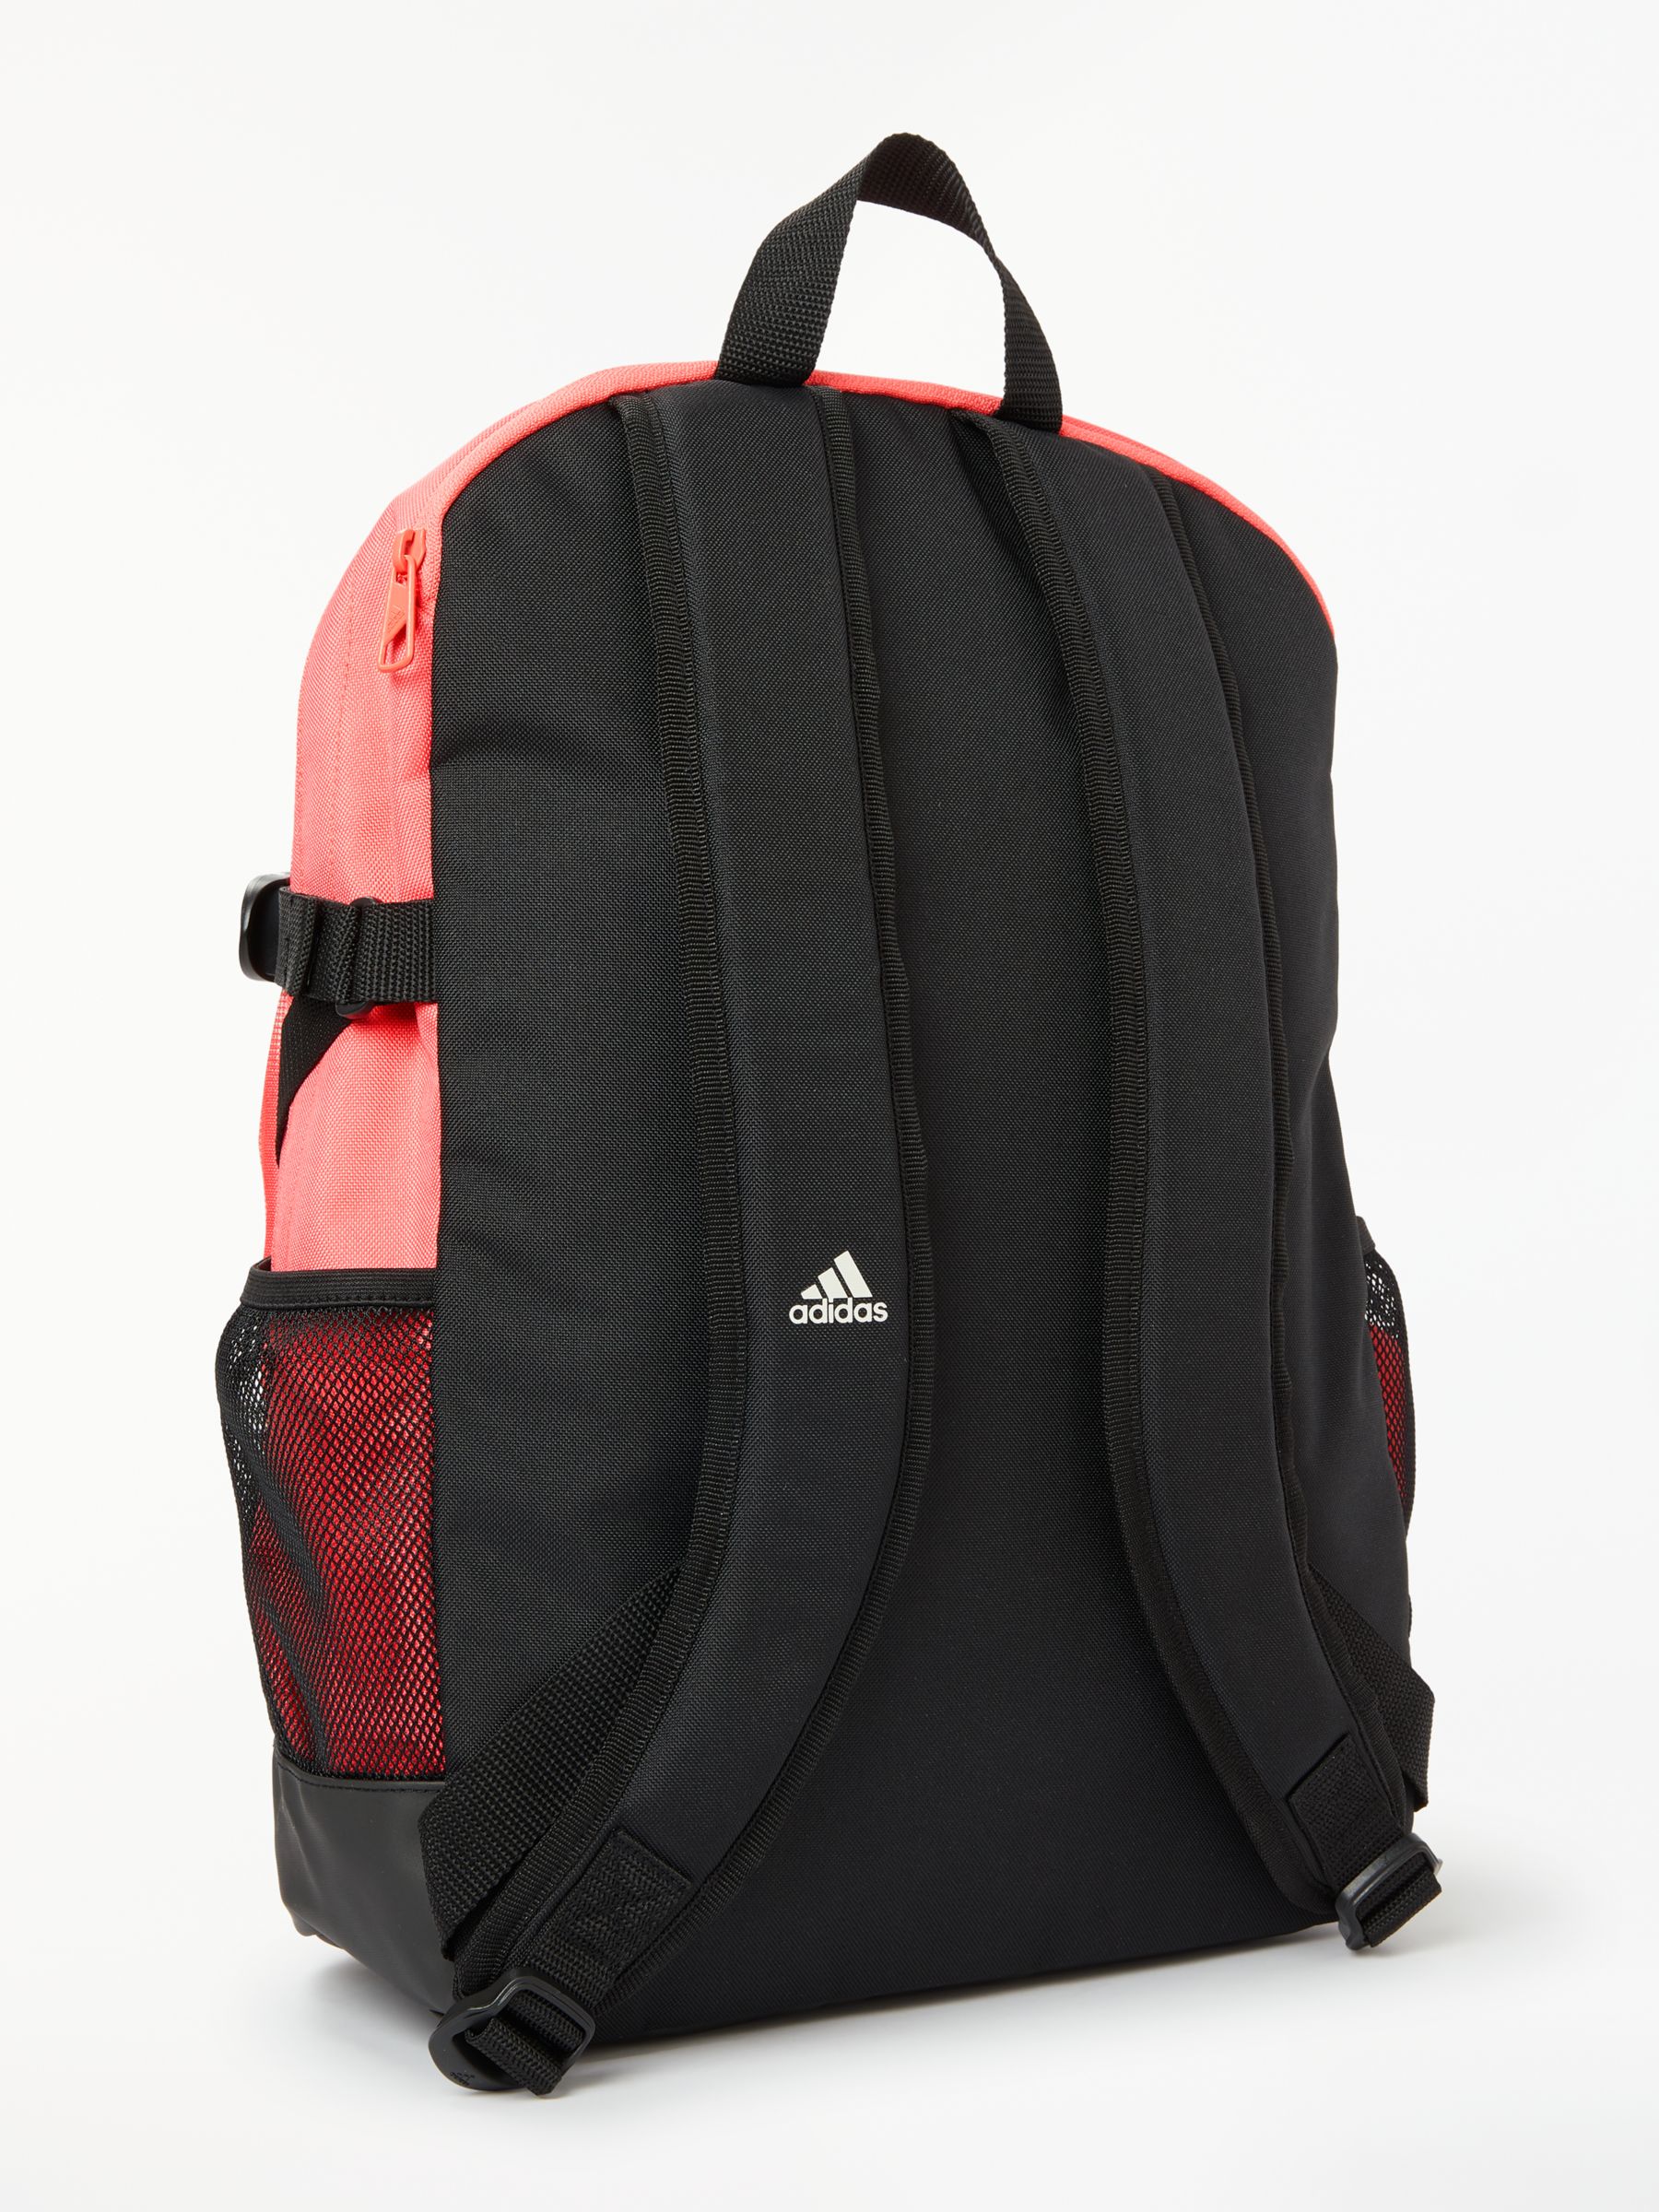 adidas Power 4 Graphic Backpack, Prism 